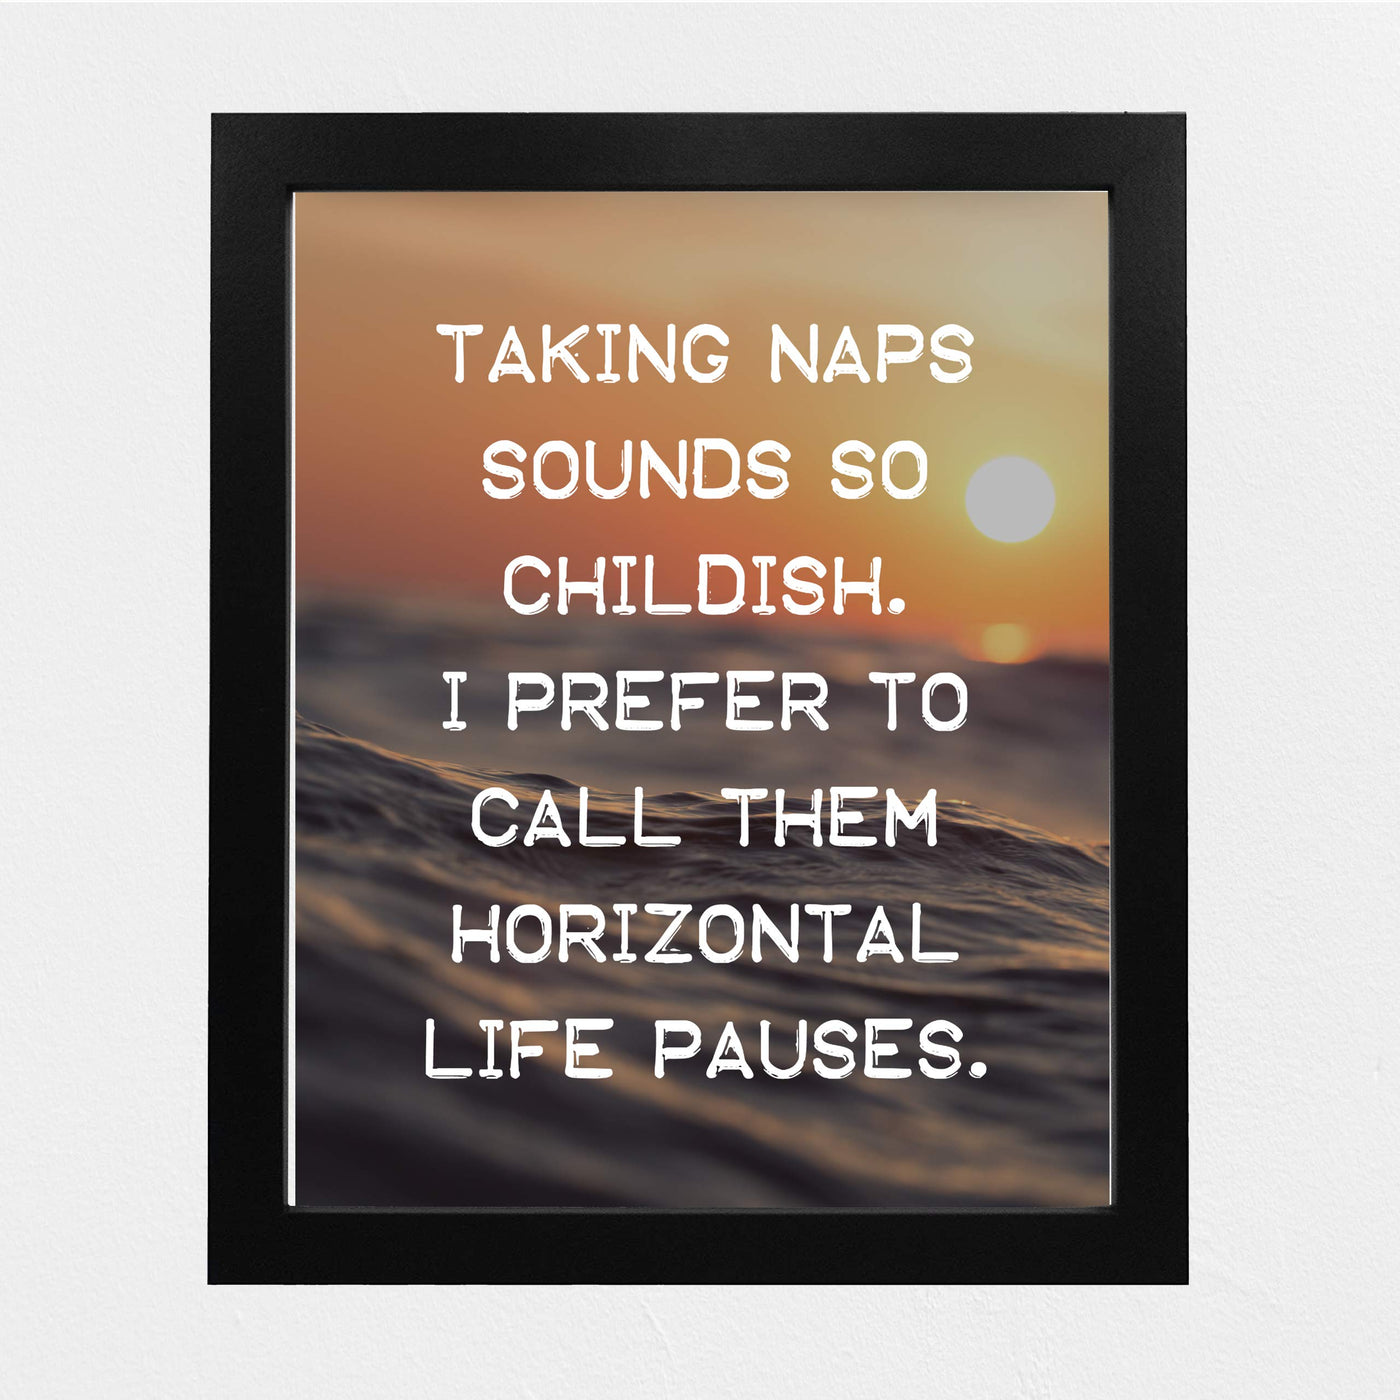 Taking Naps Sounds So Childish Funny Wall Art Sign -8 x 10" Ocean Sunset Poster Print-Ready to Frame. Humorous Home-Office-Bar-Shop-Cave Decor. Great Novelty Sign & Fun Gift for Sarcastic Friends!